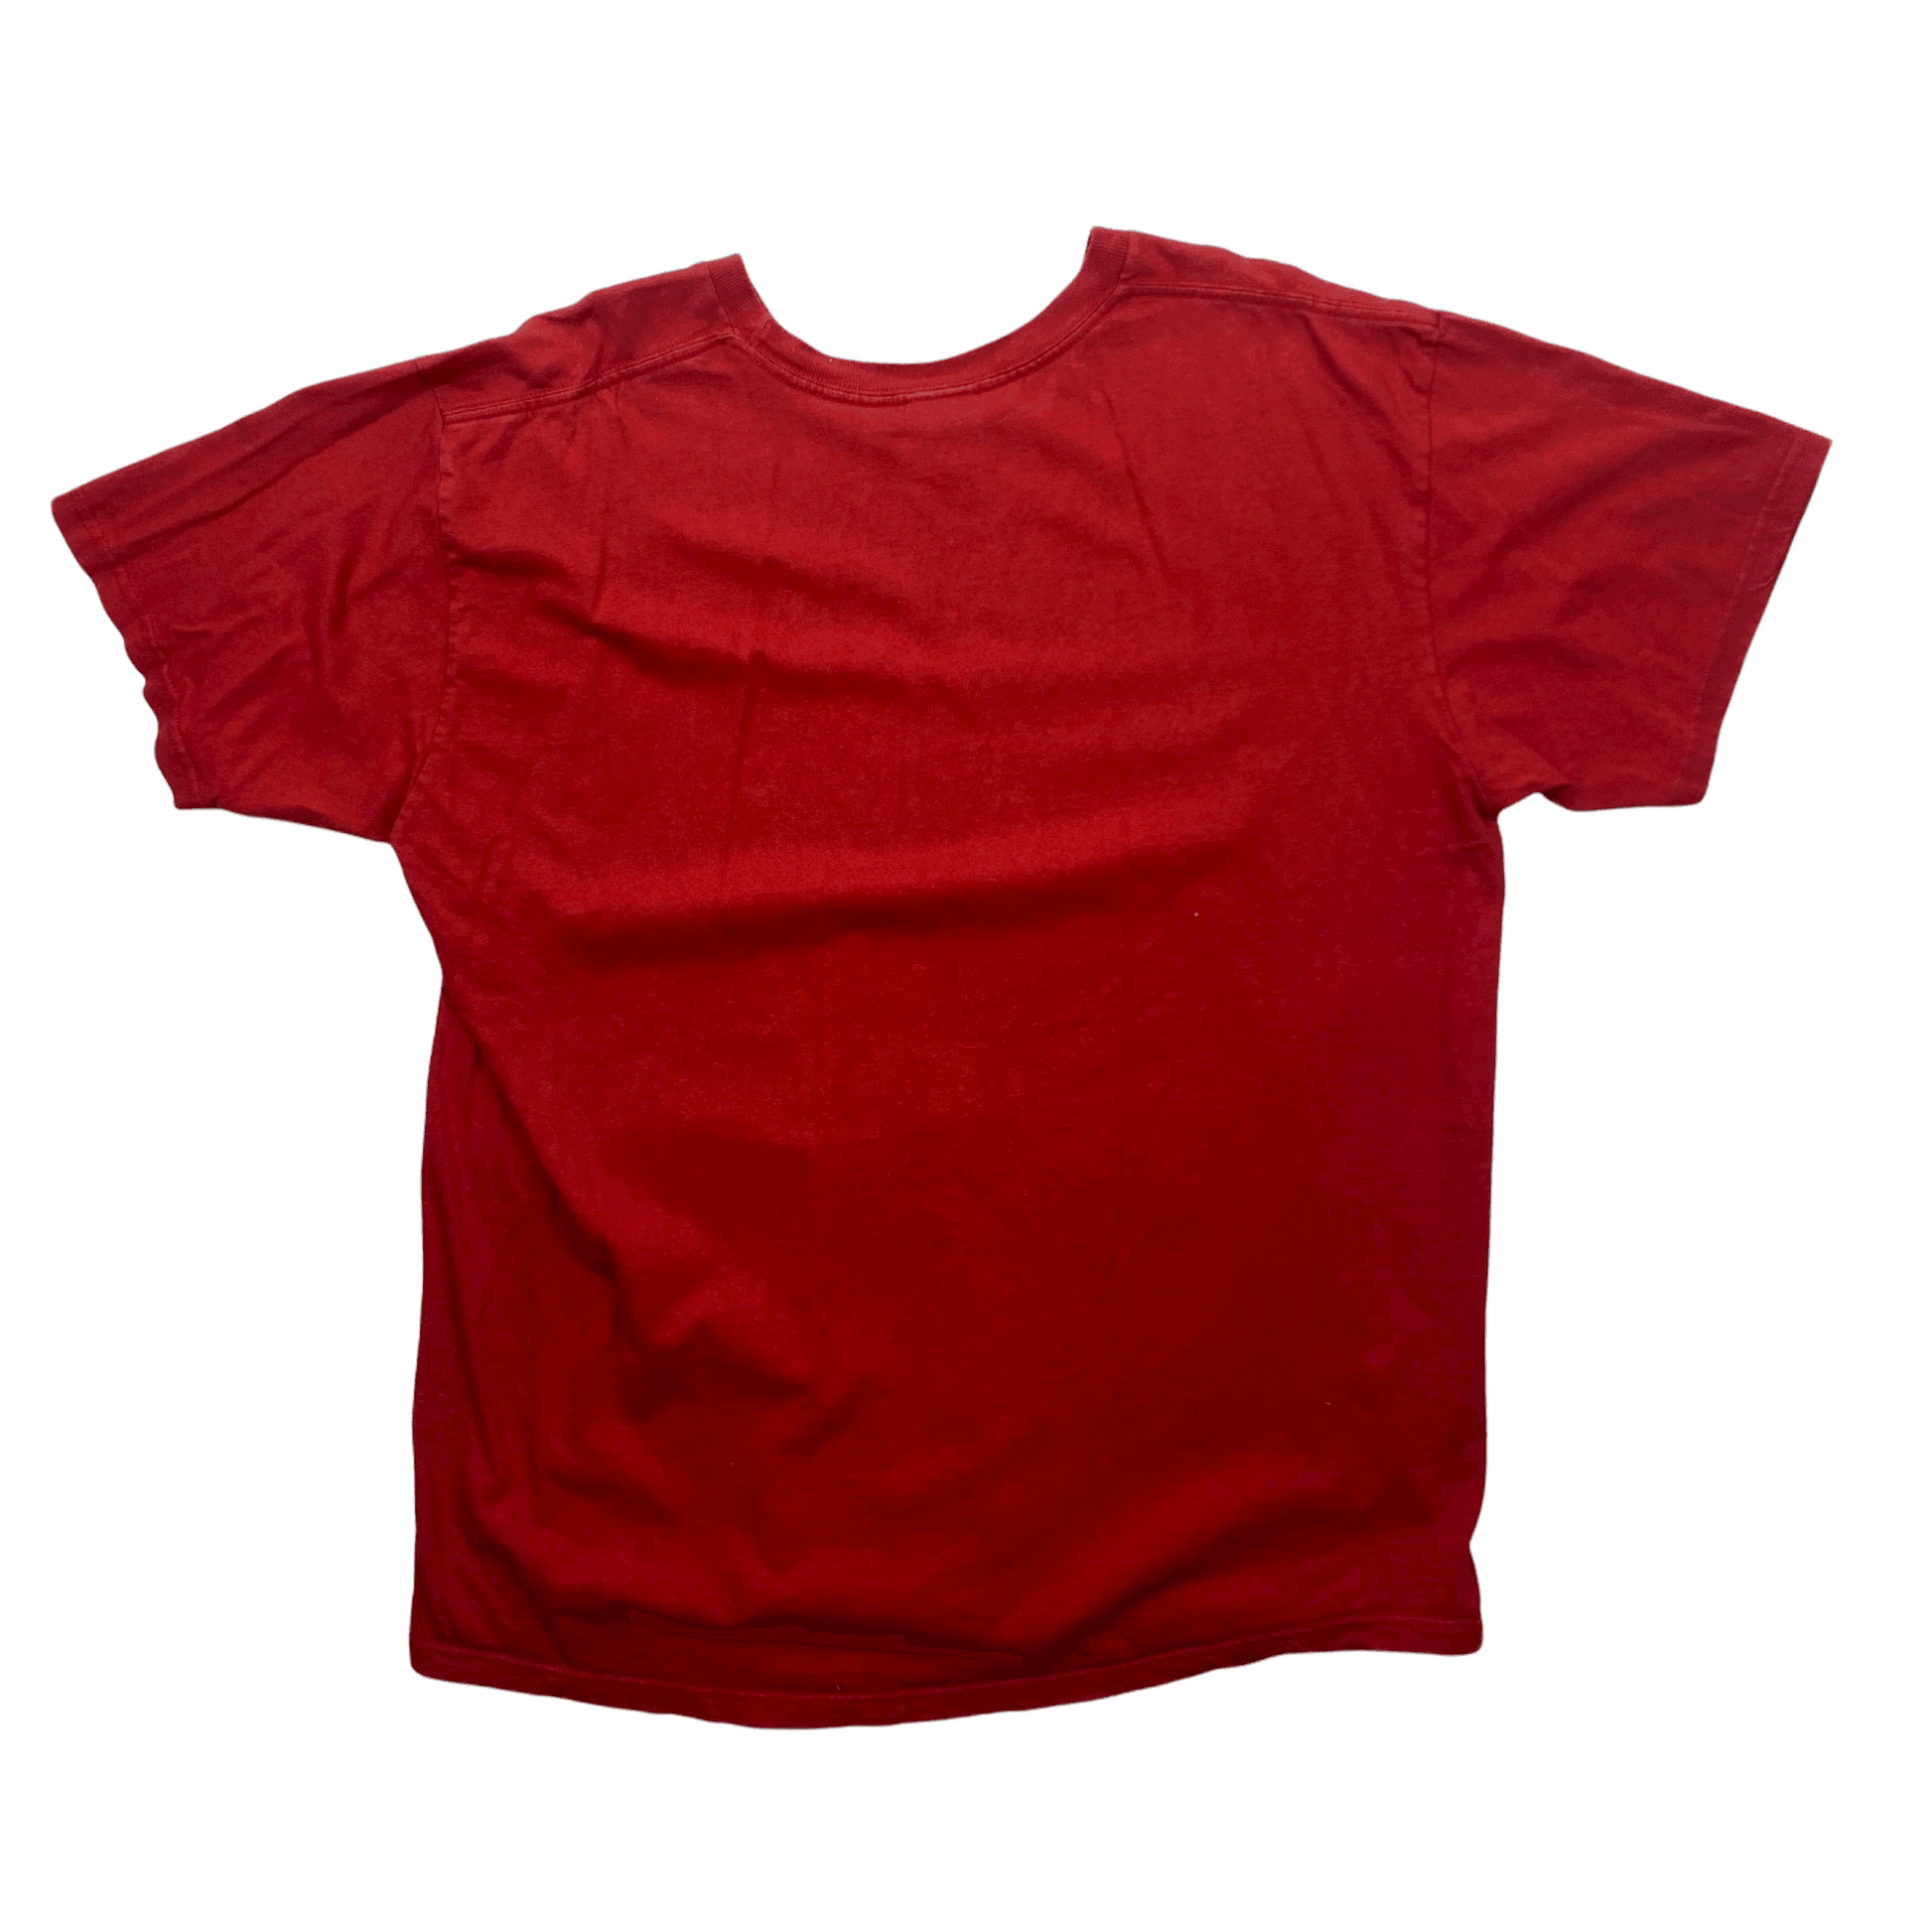 Vintage 90s Red Nike Spell-Out + Centre Swoosh Tee - Extra Large - The Streetwear Studio